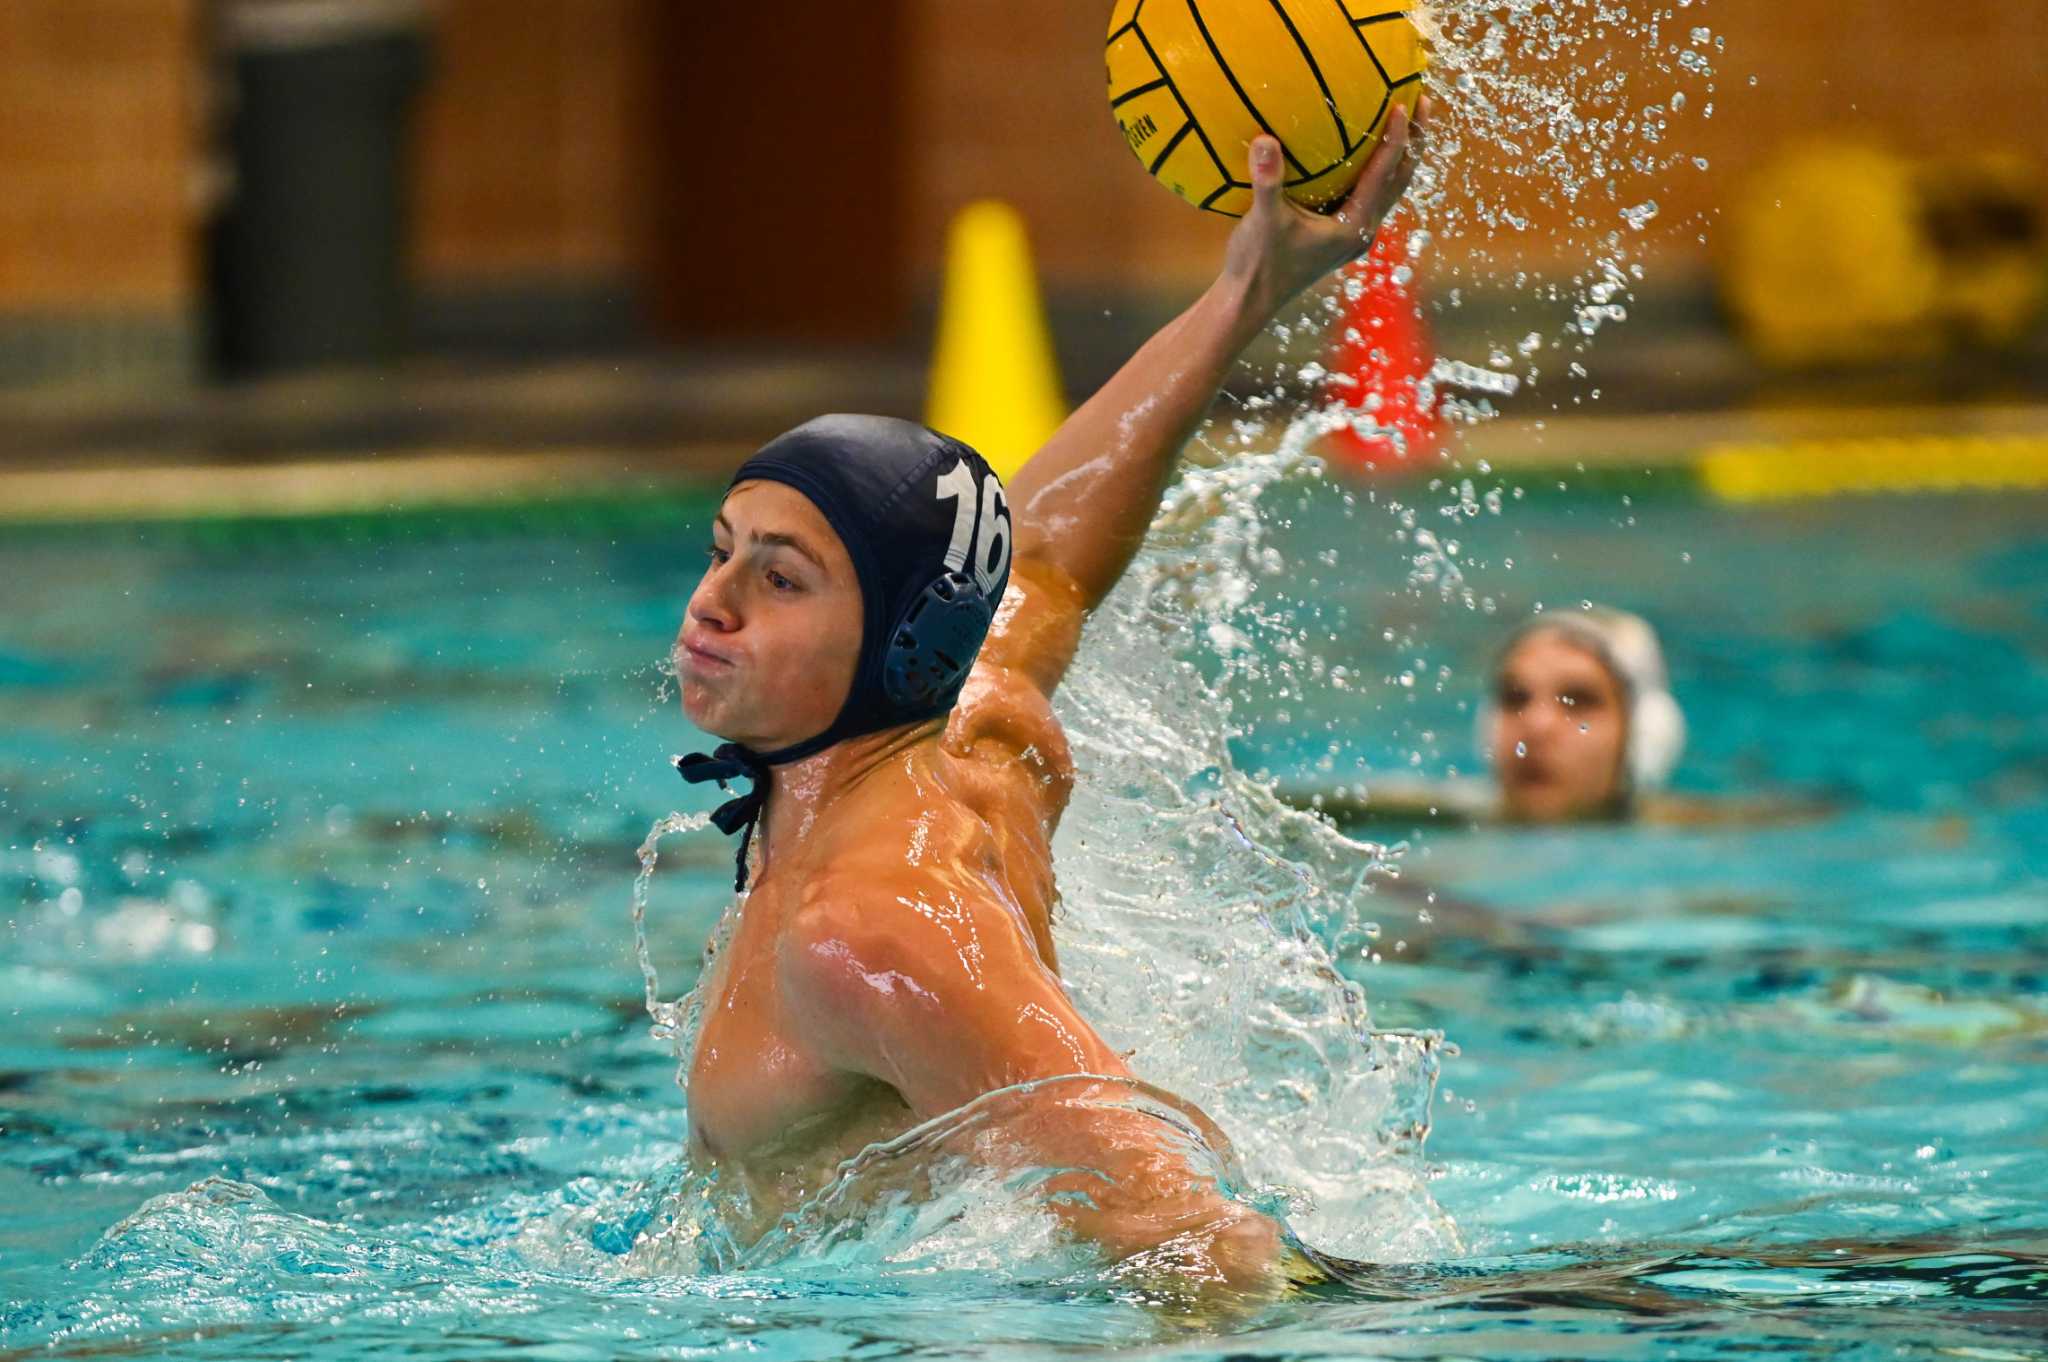 Champions Phenomenal Water Polo Season Finishes With Silver